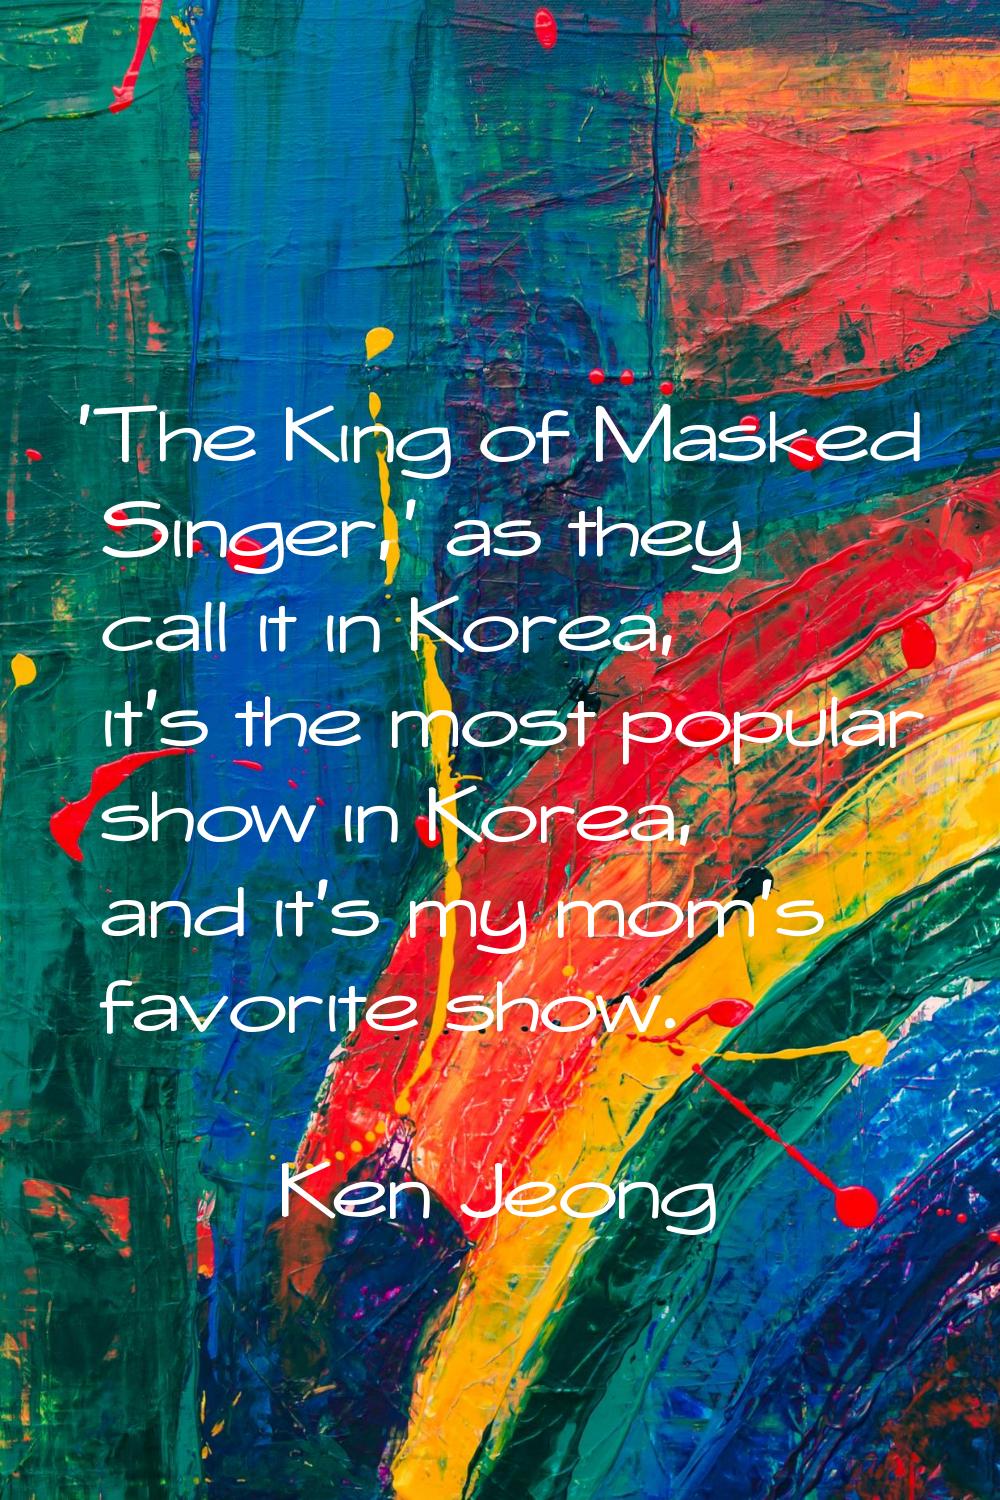 'The King of Masked Singer,' as they call it in Korea, it's the most popular show in Korea, and it'